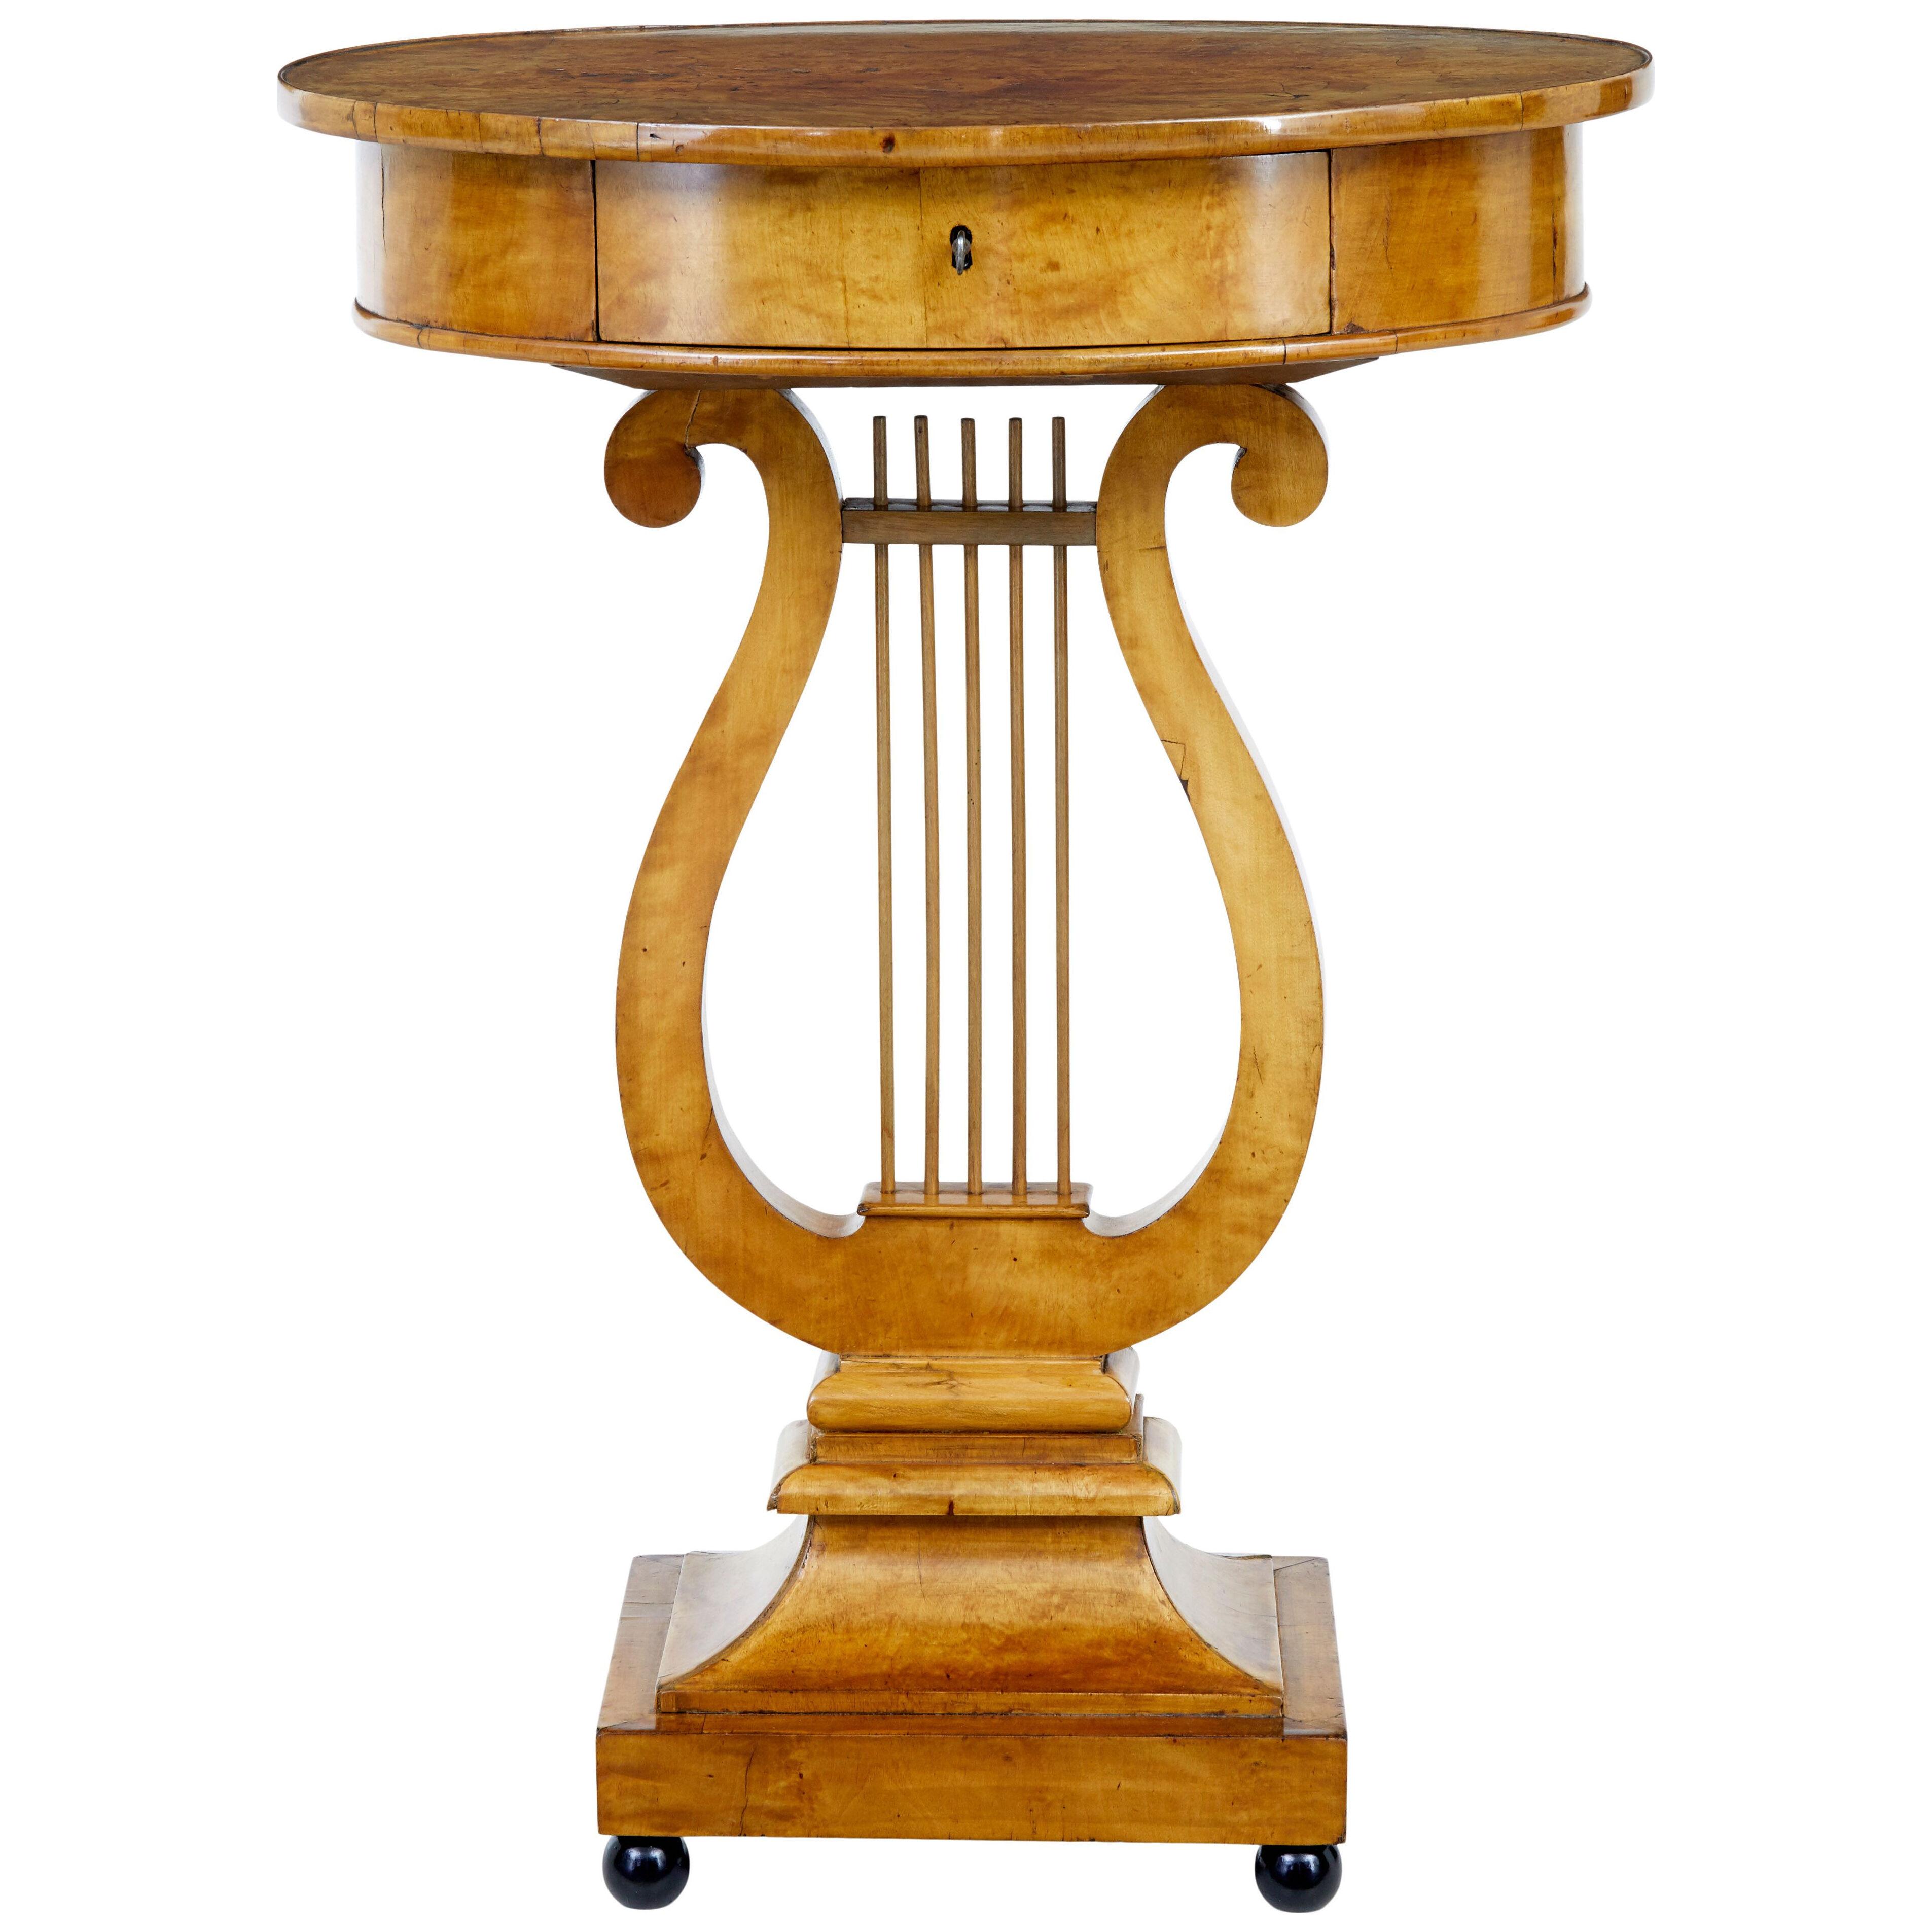 EARLY 19TH CENTURY BIRCH EMPIRE LYRE FORM SIDE TABLE